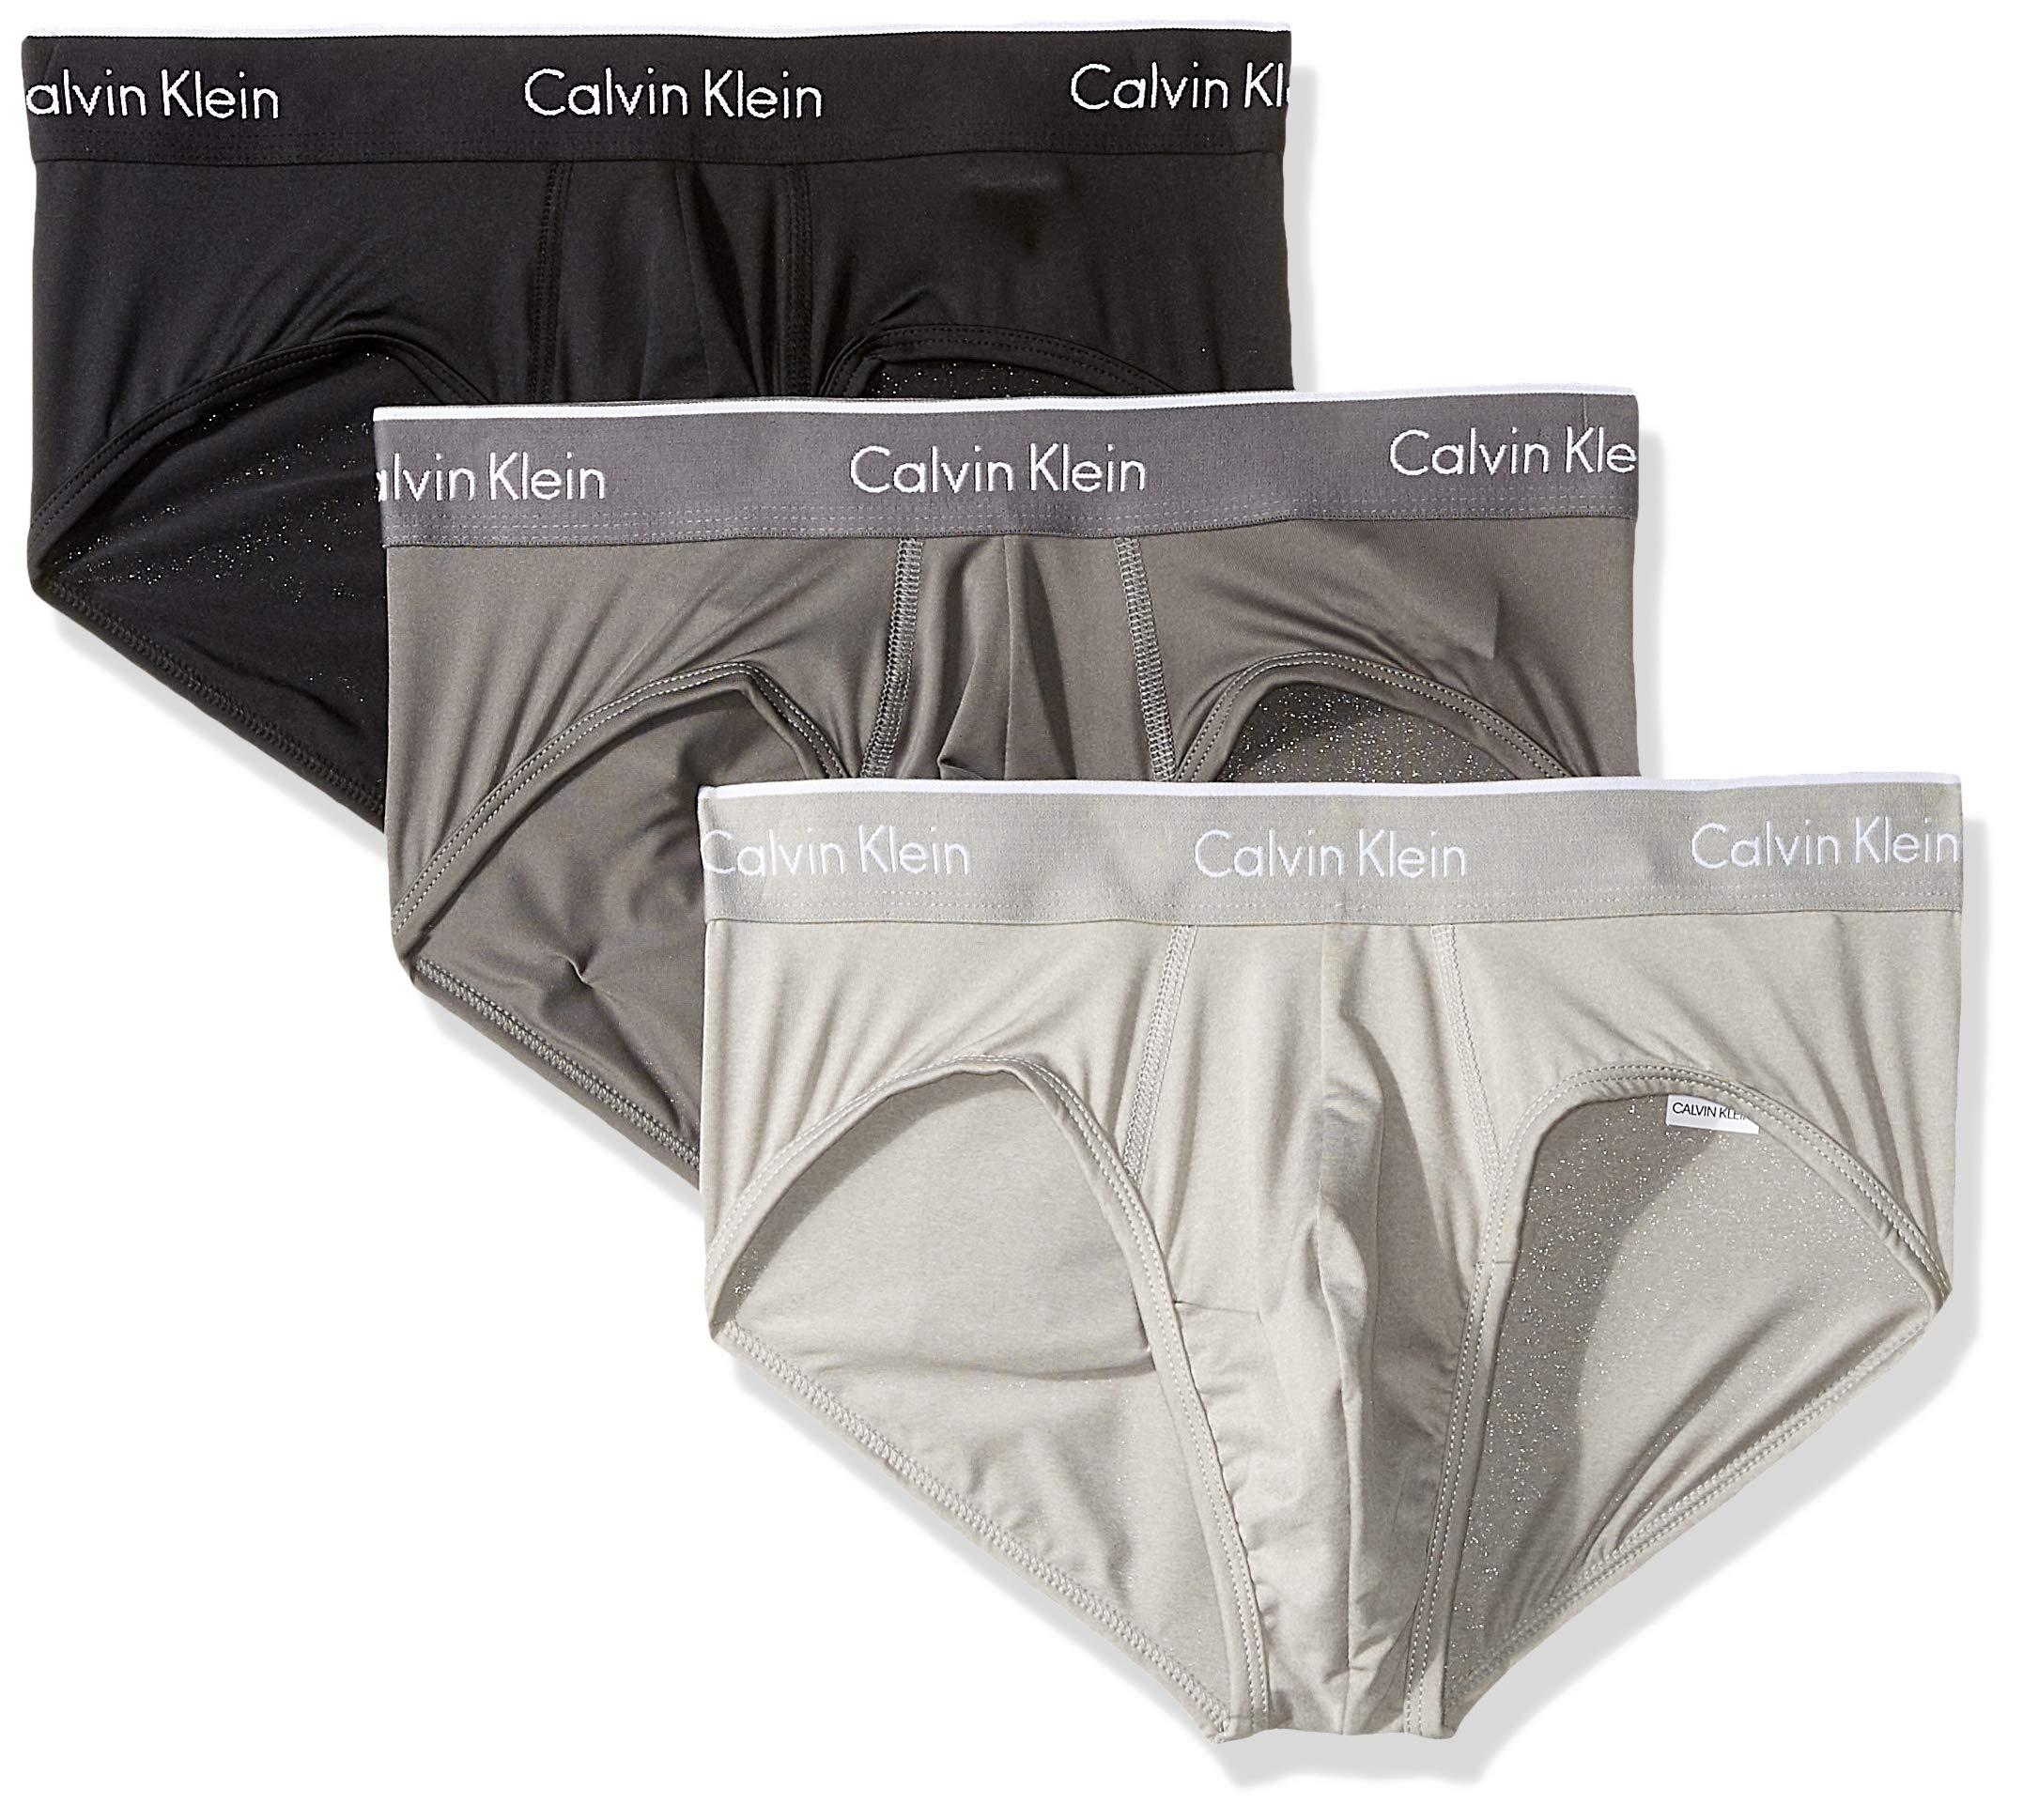 3 Pack Calvin Klein Briefs Top Sellers, 51% OFF | www.ilpungolo.org